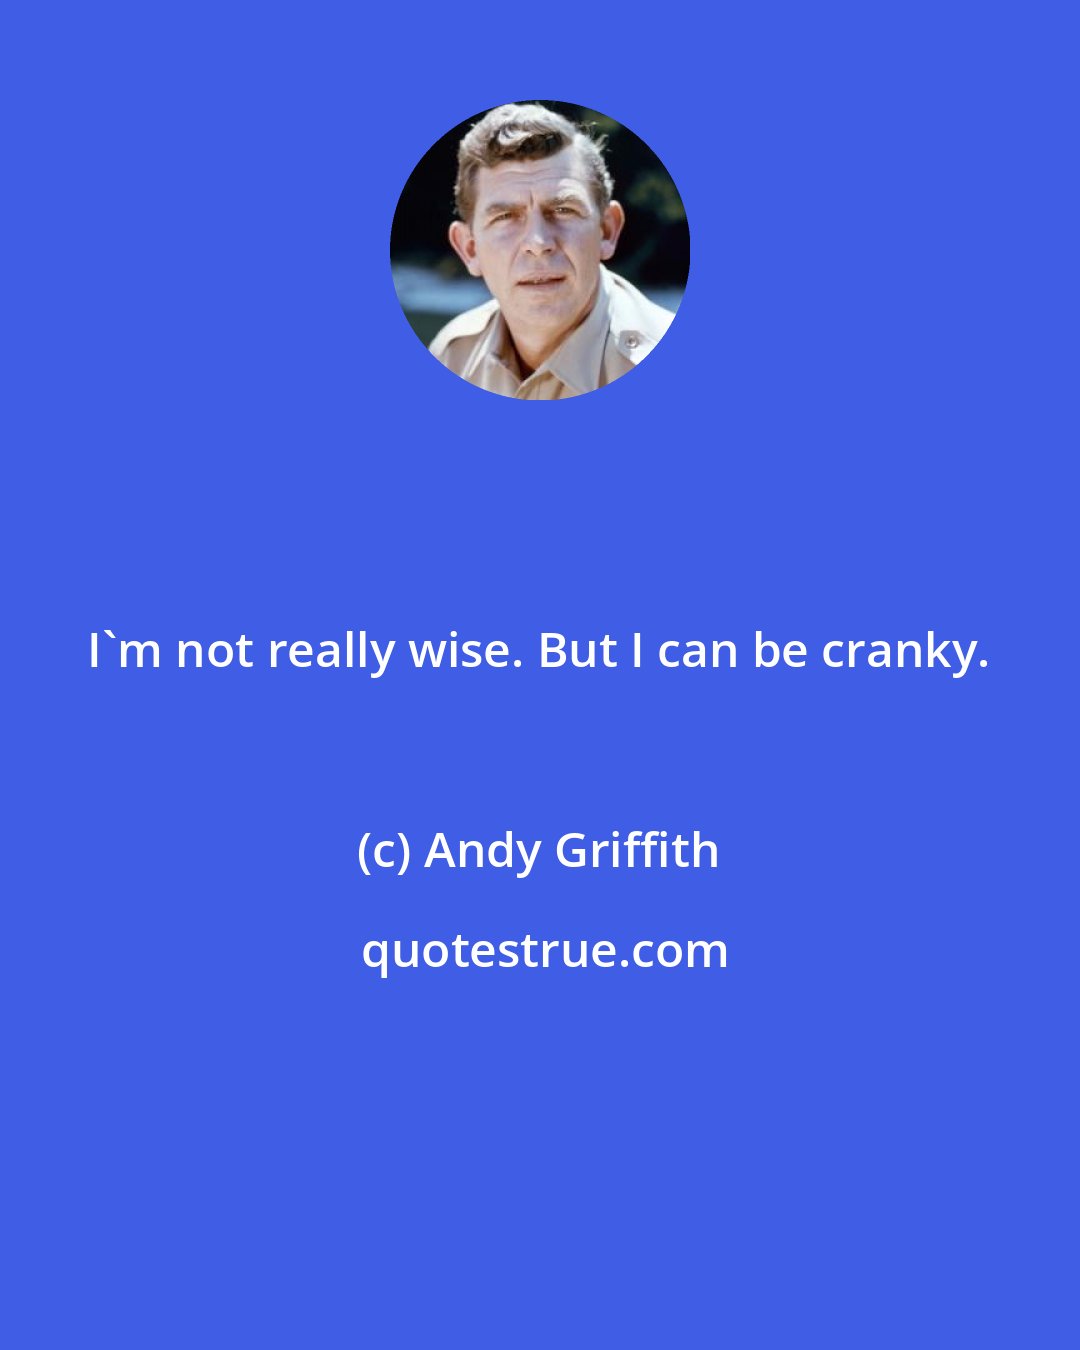 Andy Griffith: I'm not really wise. But I can be cranky.